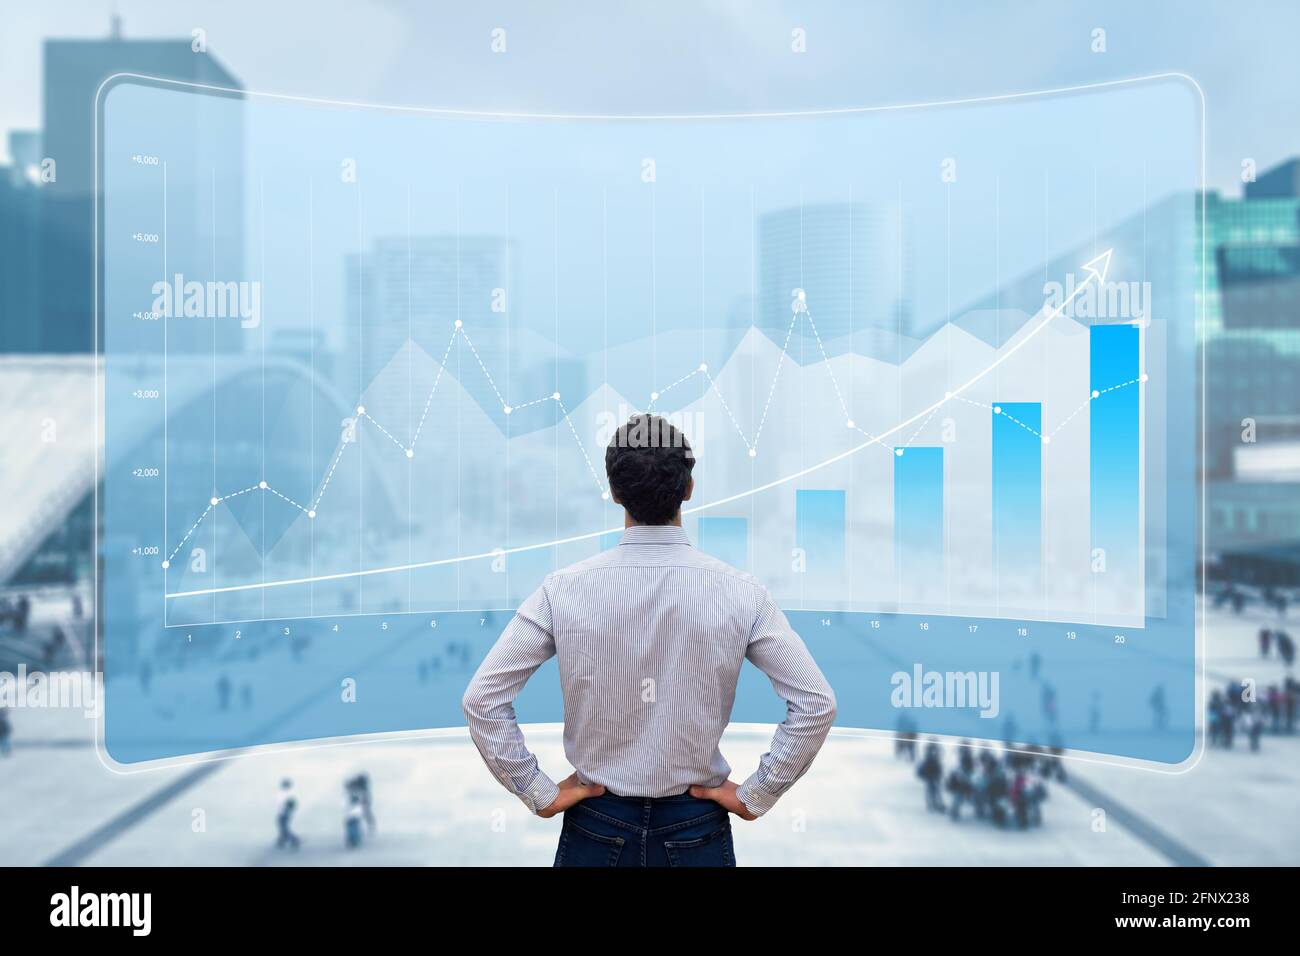 Financial data showing growing revenue and successful business strategy. Finance analyst or executive manager analyzing profit on chart report with ci Stock Photo